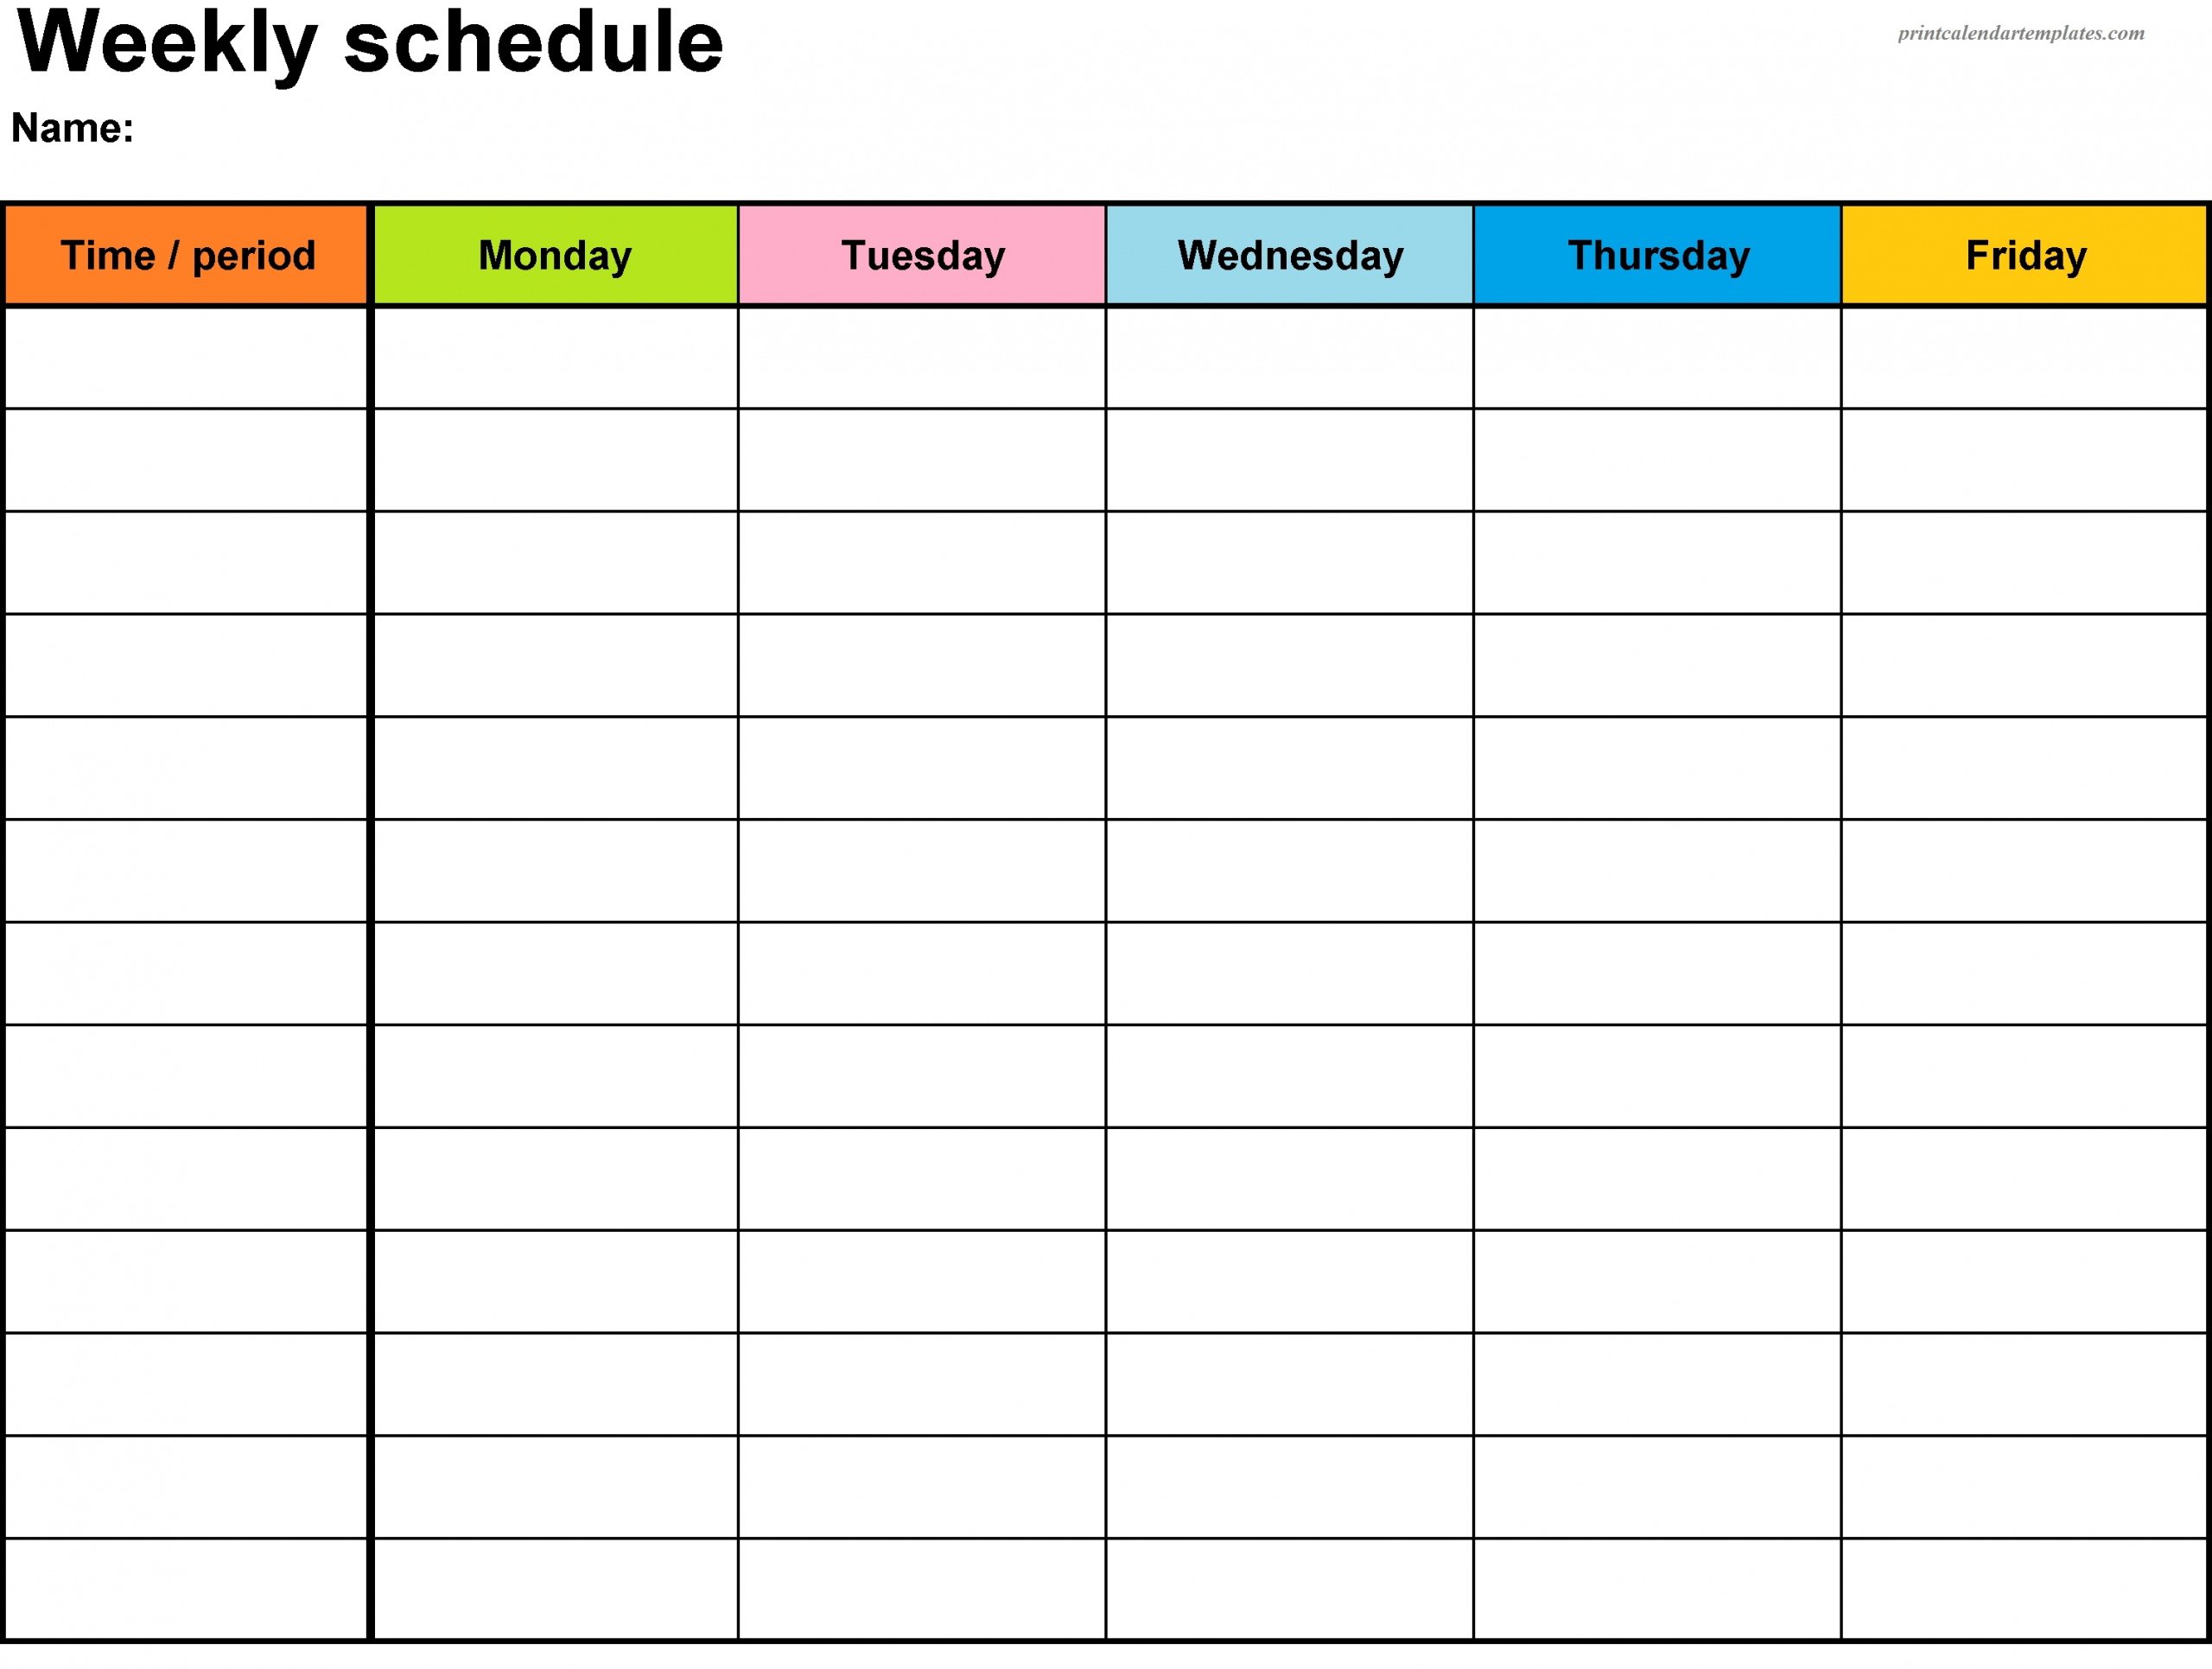 Get Weekly Schedule Template With Time Slots